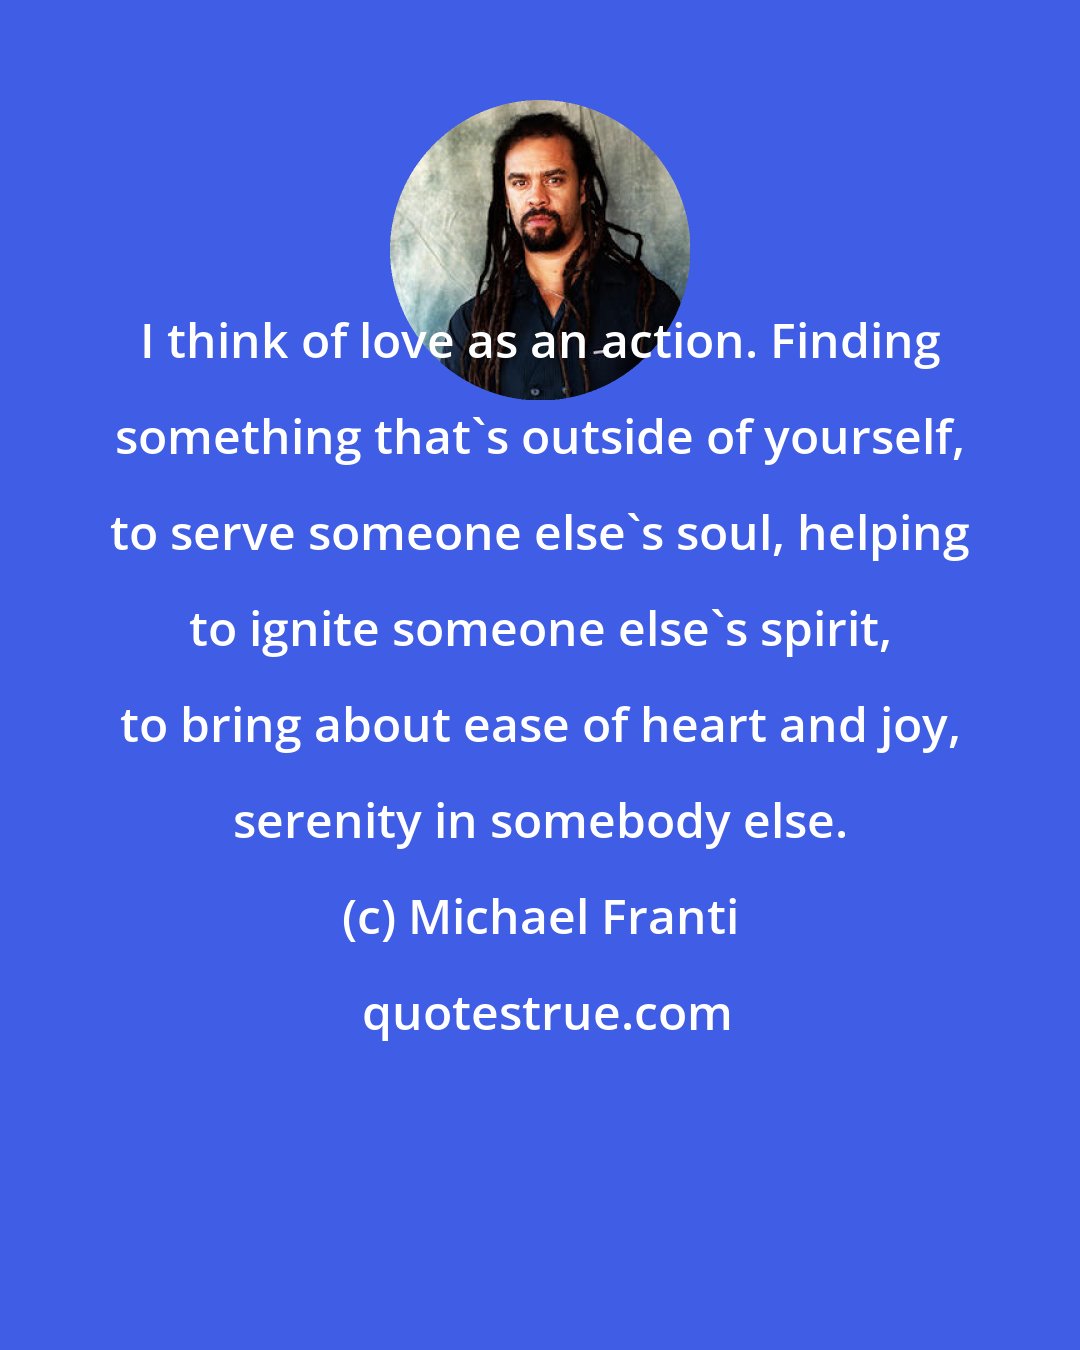 Michael Franti: I think of love as an action. Finding something that's outside of yourself, to serve someone else's soul, helping to ignite someone else's spirit, to bring about ease of heart and joy, serenity in somebody else.